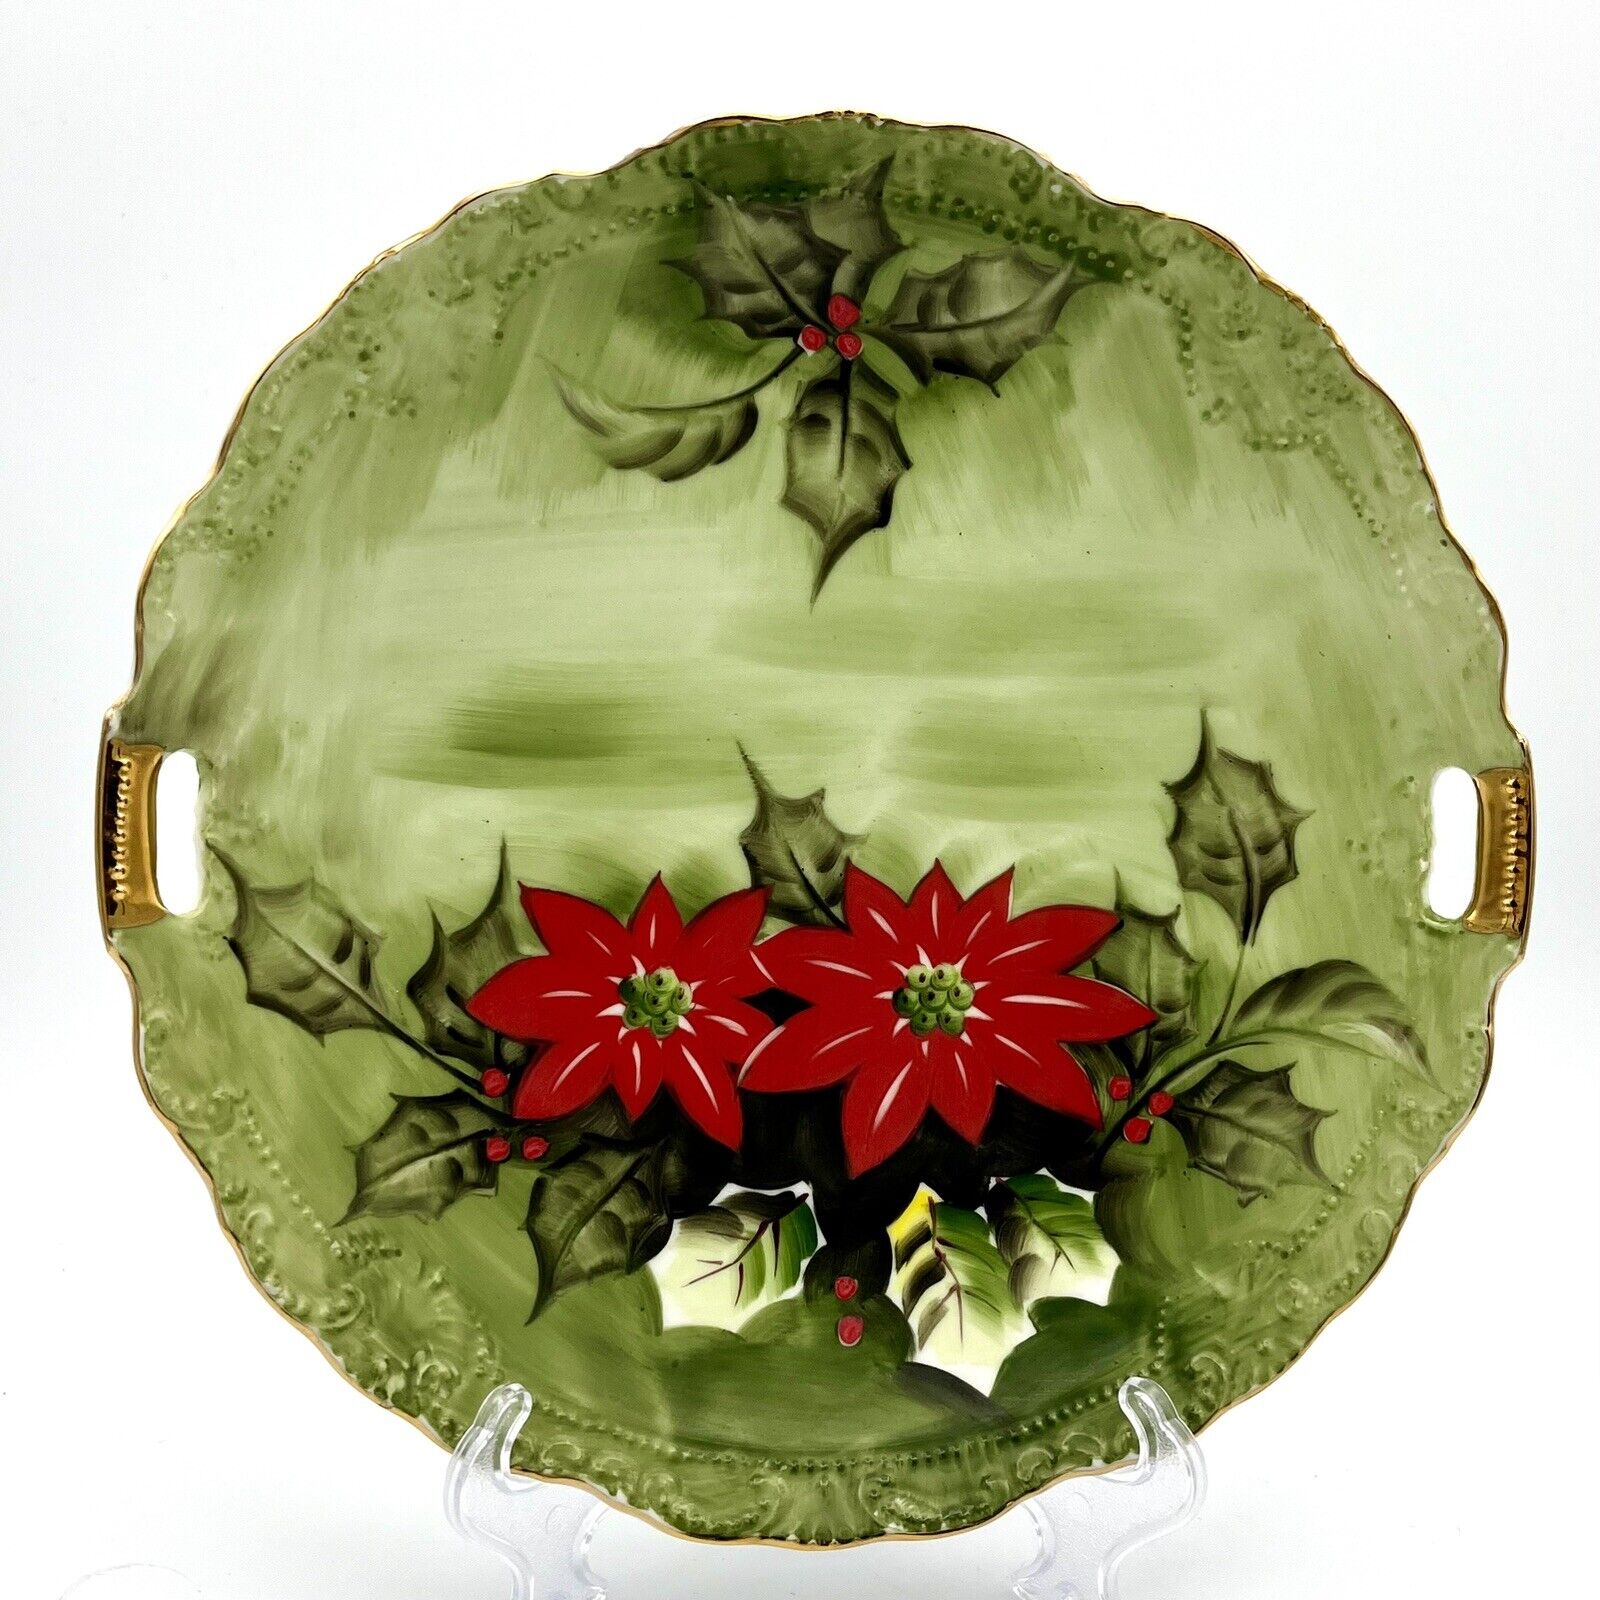 Vntg Lefton China Limited Edition Handpainted Poinsettia Christmas Plate 4393